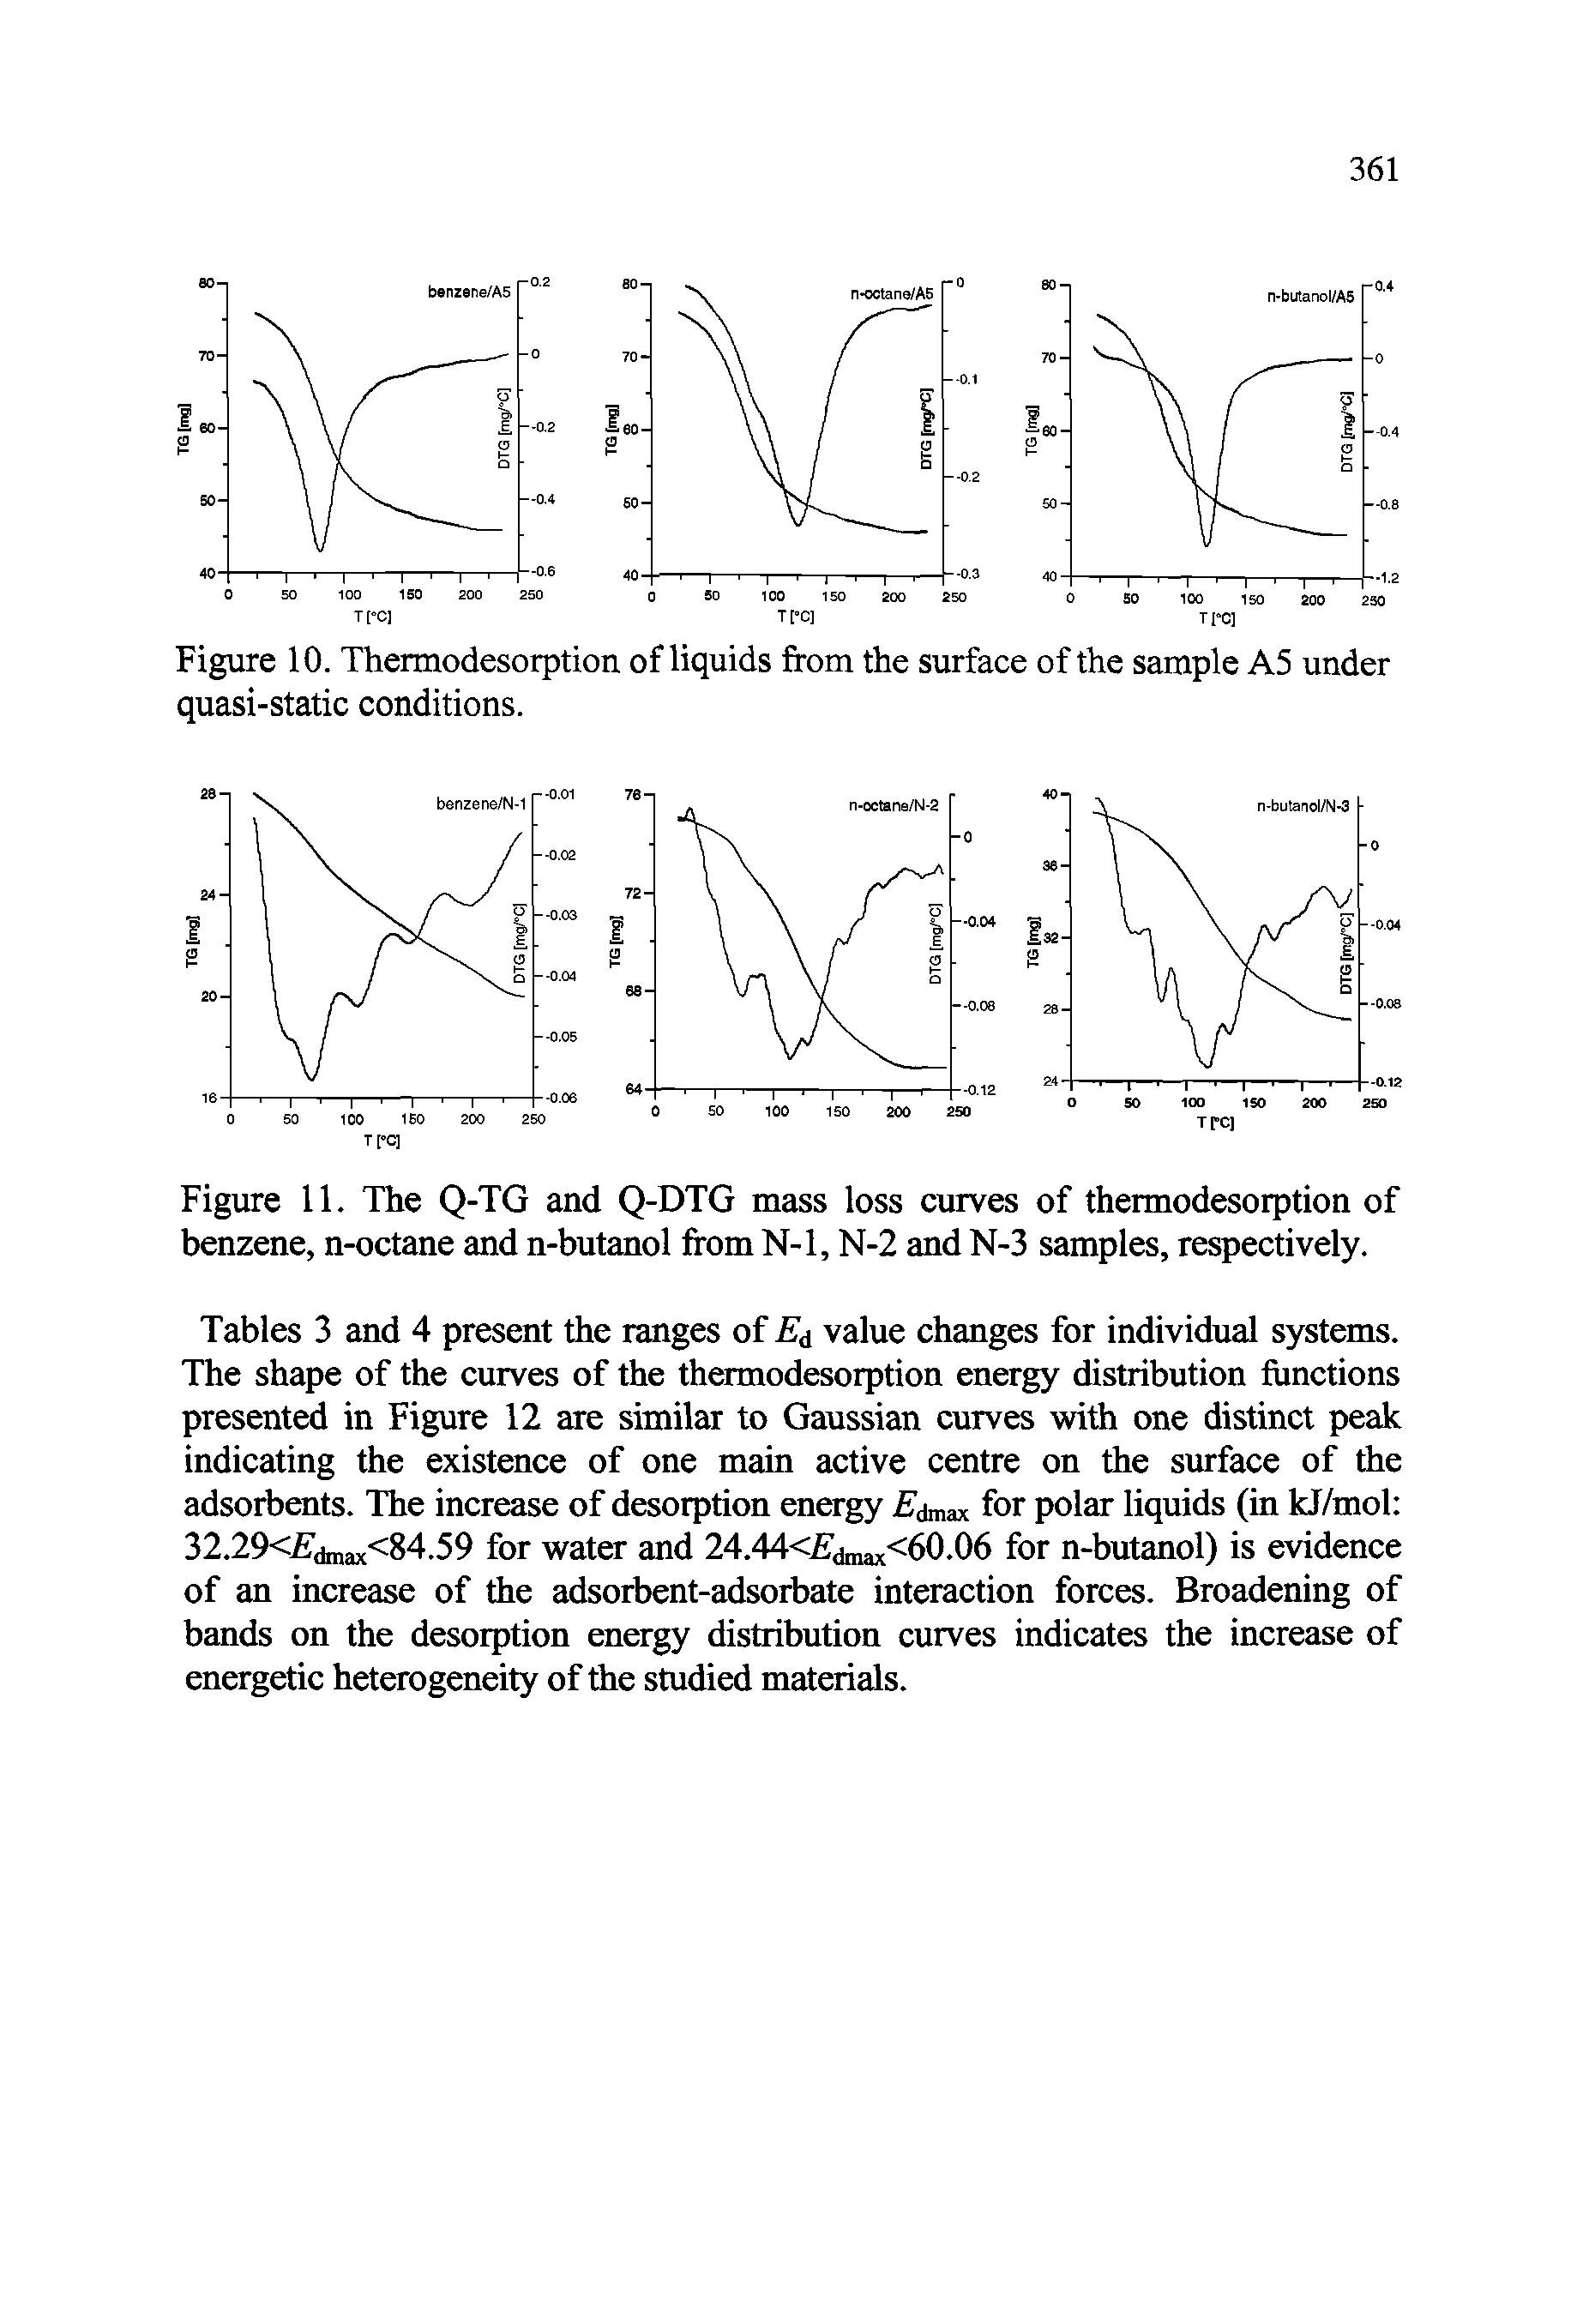 Tables 3 and 4 present the ranges of Ei value changes for individual systems. The shape of the curves of the thermodesorption energy distribution functions presented in Figure 12 are similar to Gaussian curves with one distinct peak indicating the existence of one main active centre on the surface of the adsorbents. The increase of desorption energy dmax for polar liquids (in kJ/mol 32.29< dmax<84.59 for water and 24.44< dmax<60.06 for n-butanol) is evidence of an increase of the adsorbent-adsorbate interaction forces. Broadening of bands on the desorption energy distribution curves indicates the increase of energetic heterogeneity of the studied materials.